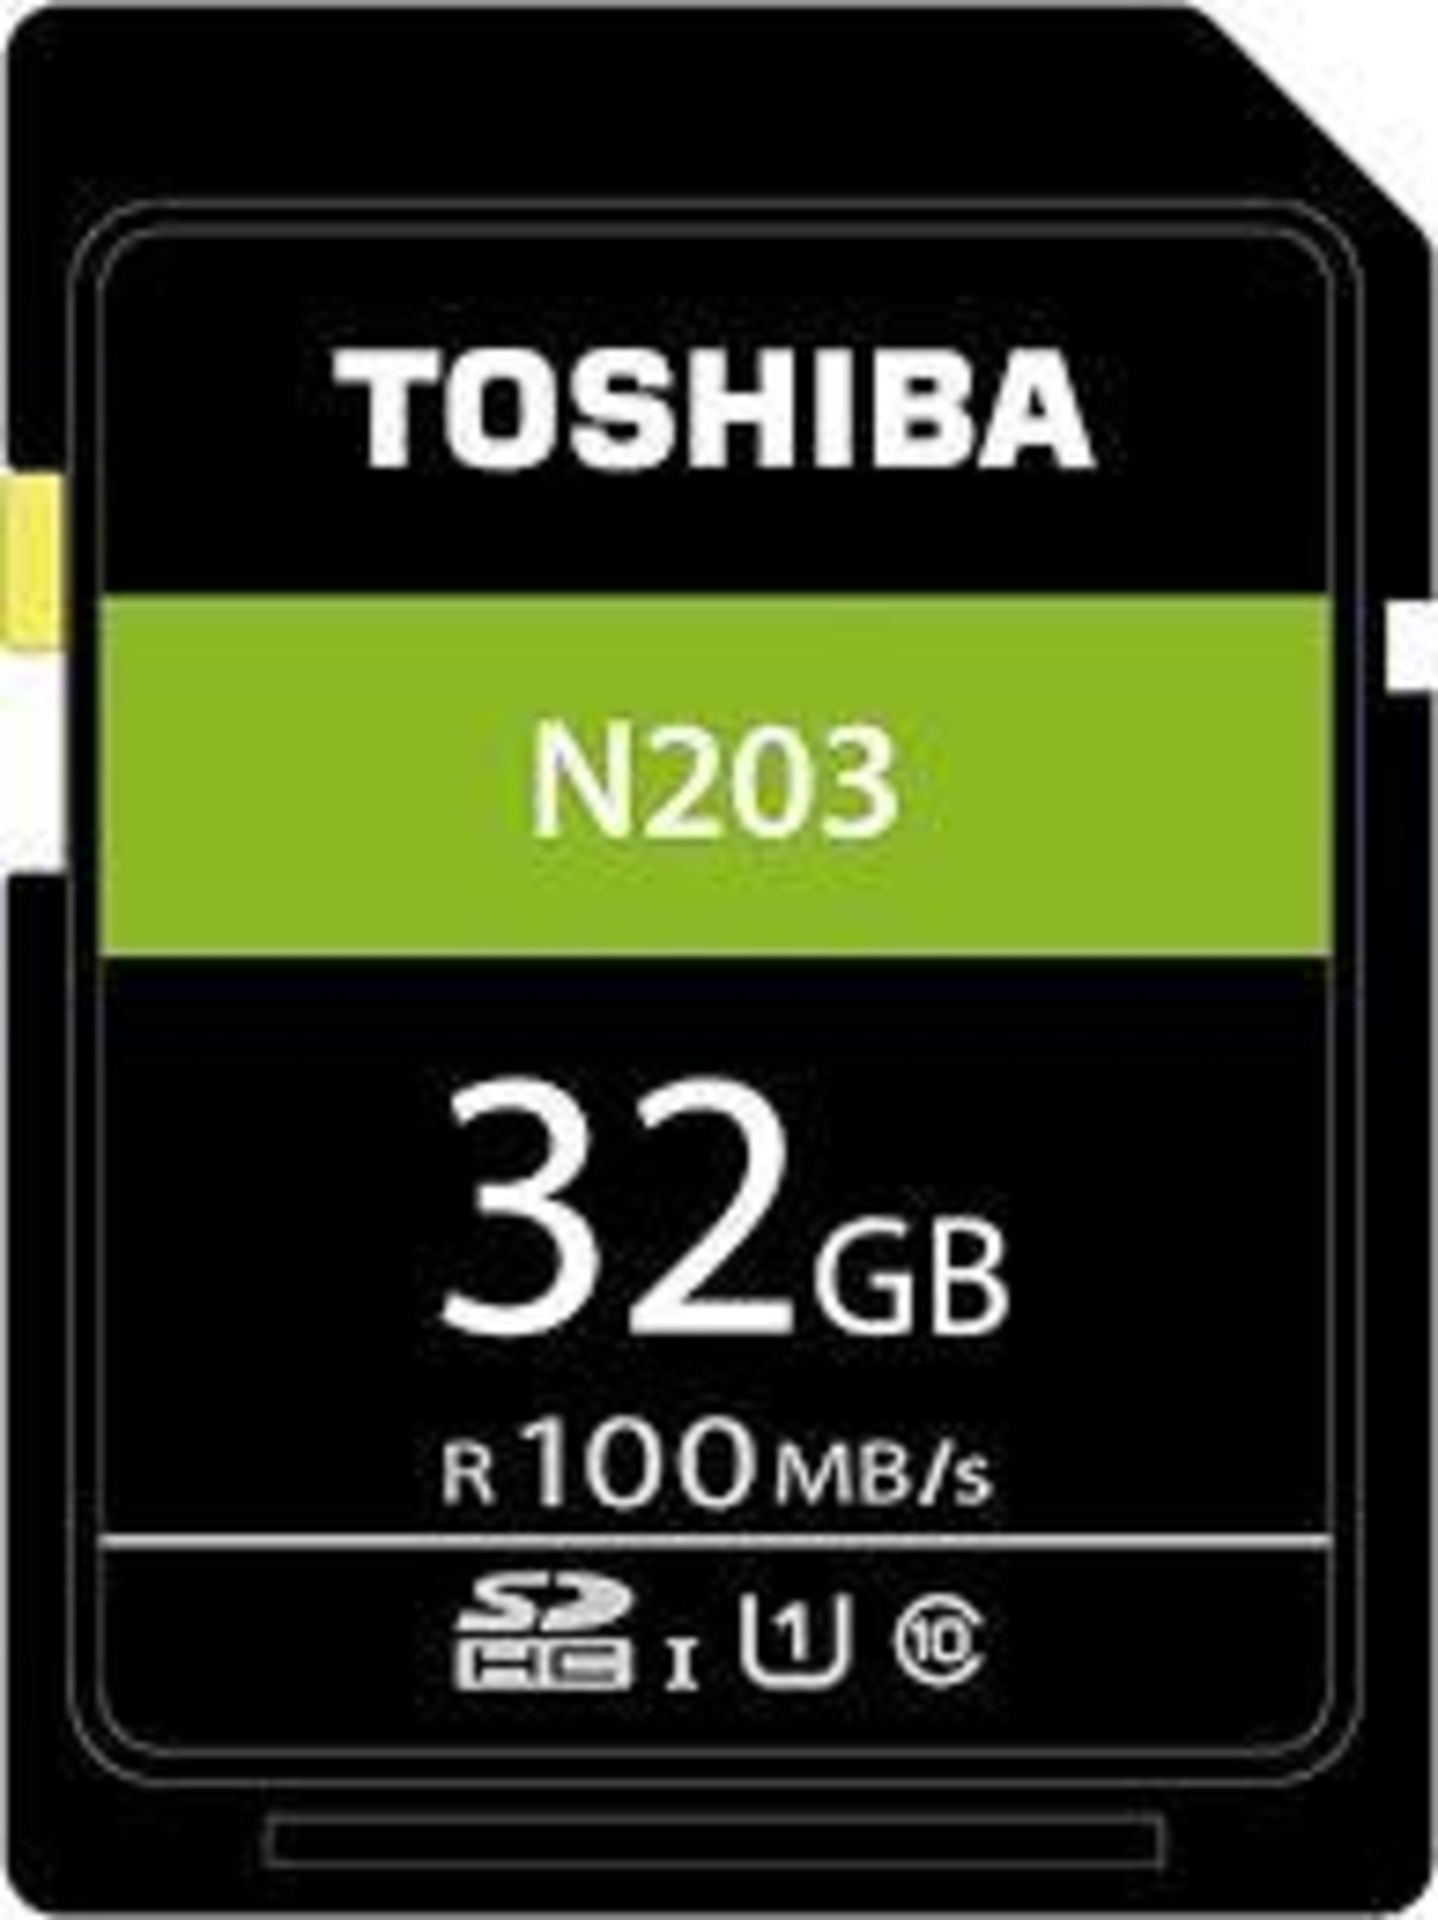 Combined RRP £150. Lot To Contain 15 Brand New Packaged Toshiba 32Gb Class 10 Uhs-1 Sdhc Cards For C